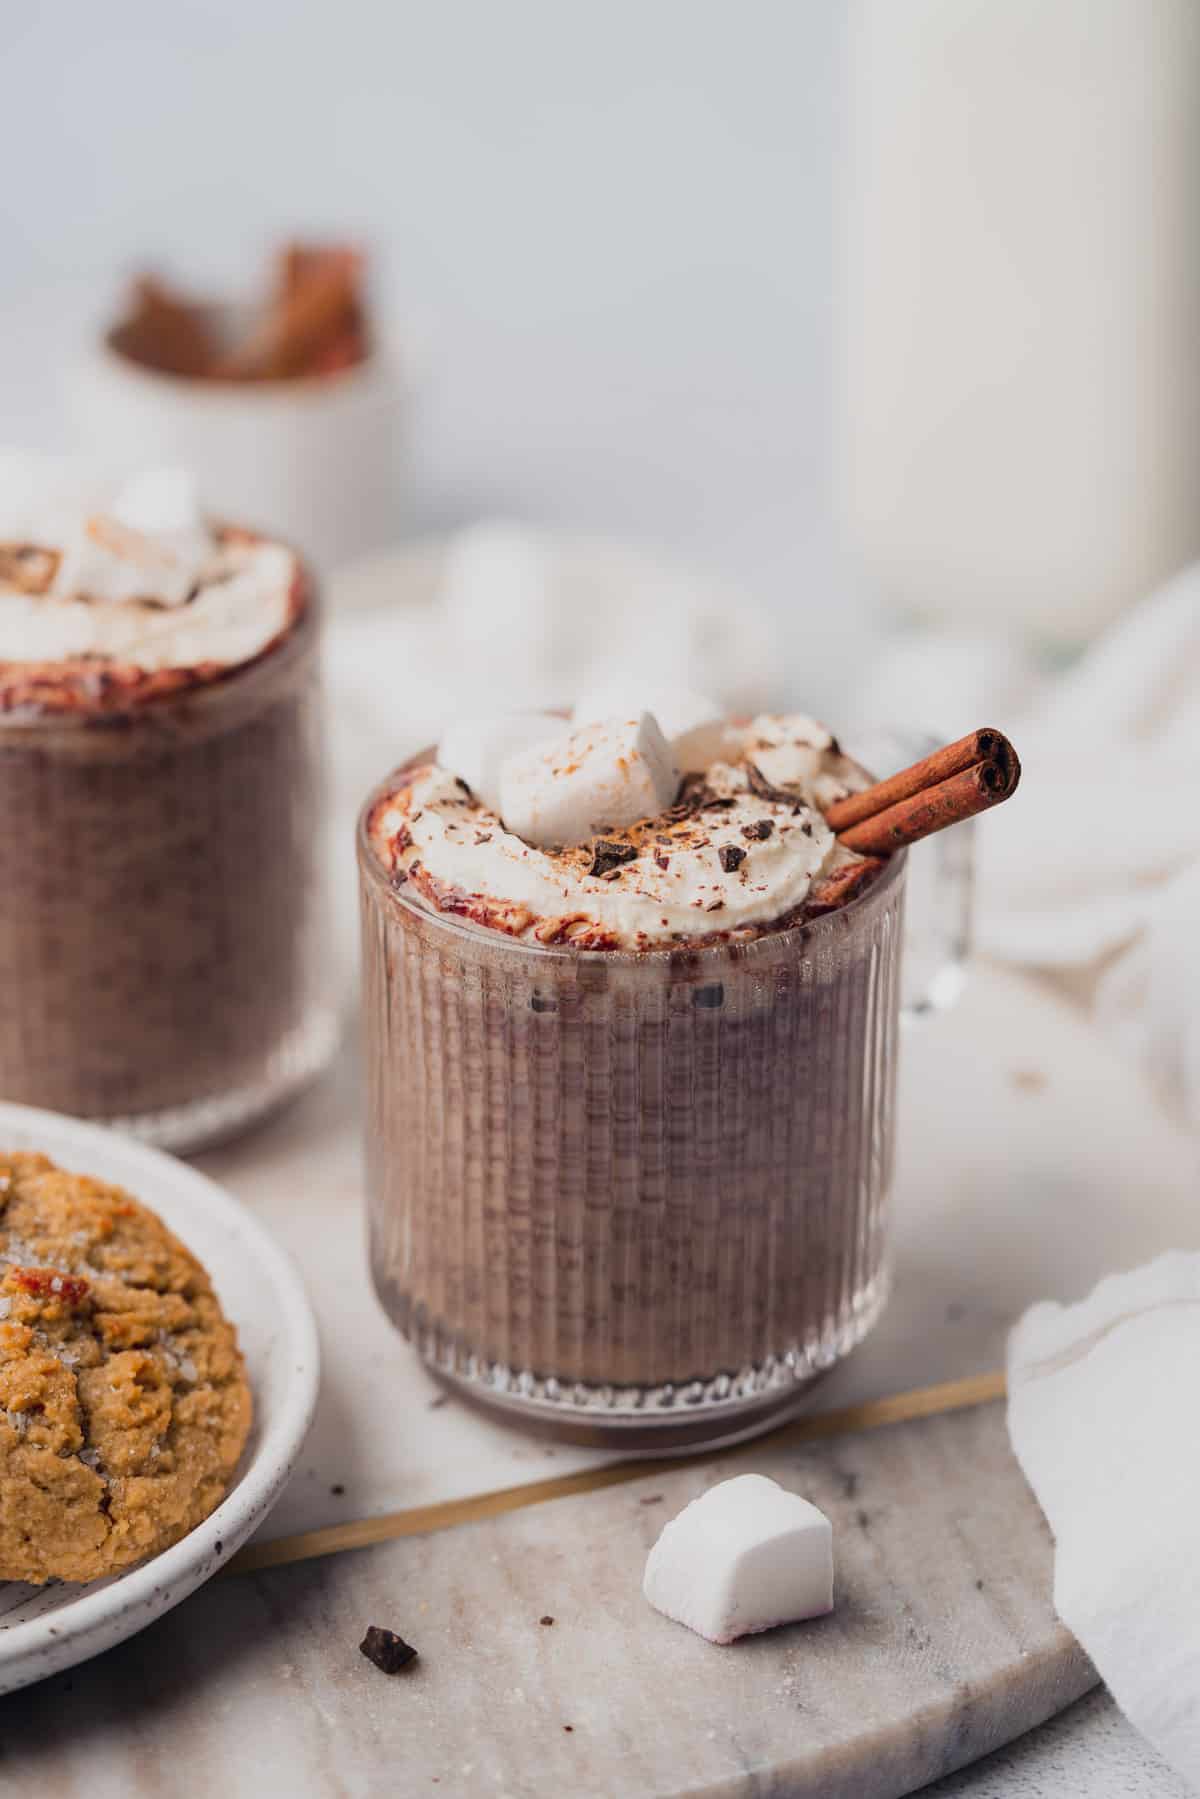 instant pot hot chocolate with marshmallows, whipped cream, and cinnamon sticks